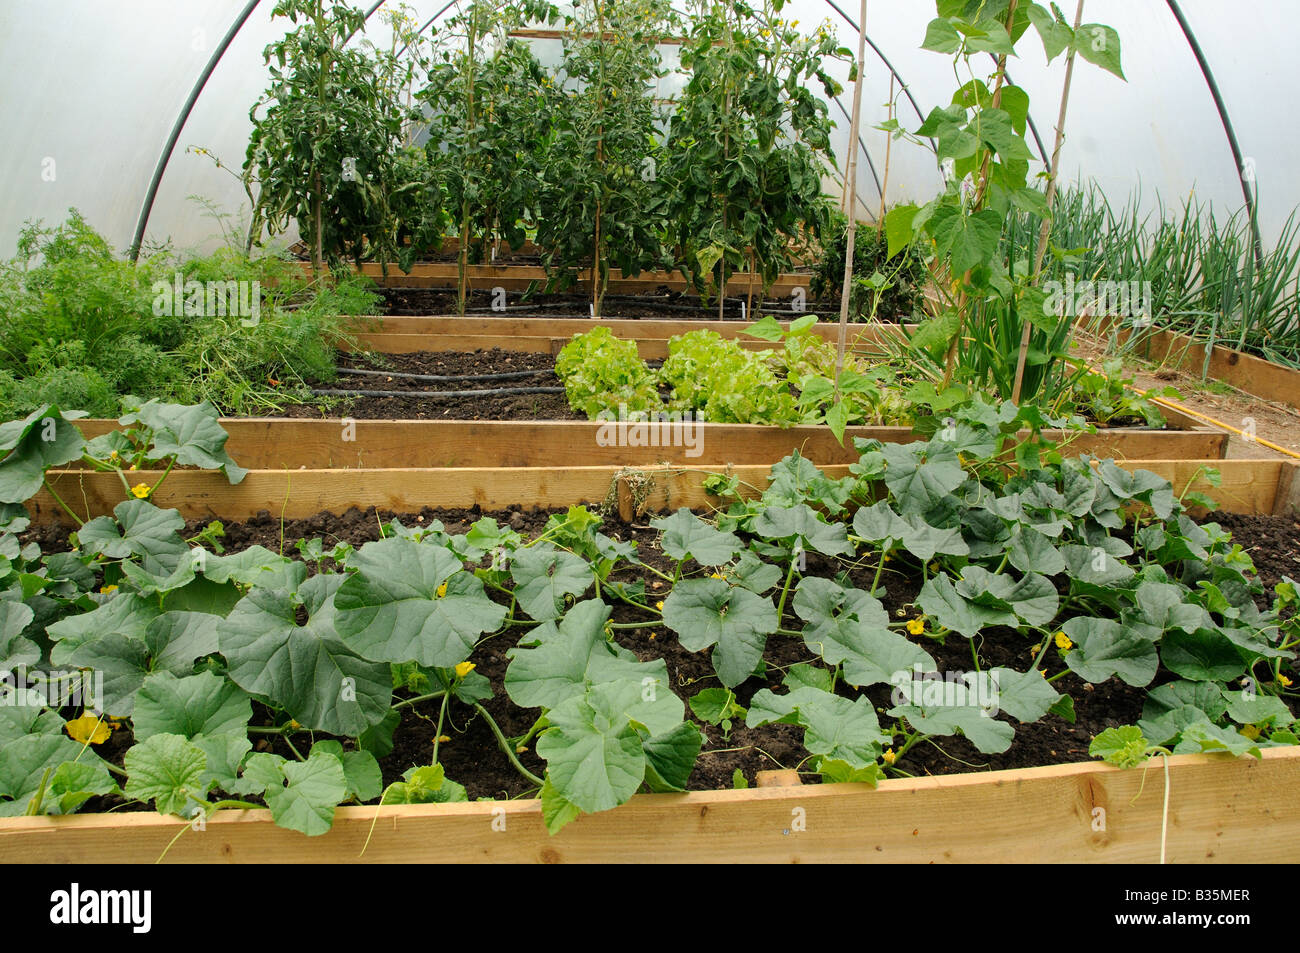 Vegetables Tomatoes Lettuce Runner beans carrots and melons growing in poly tunnel UK July Stock Photo